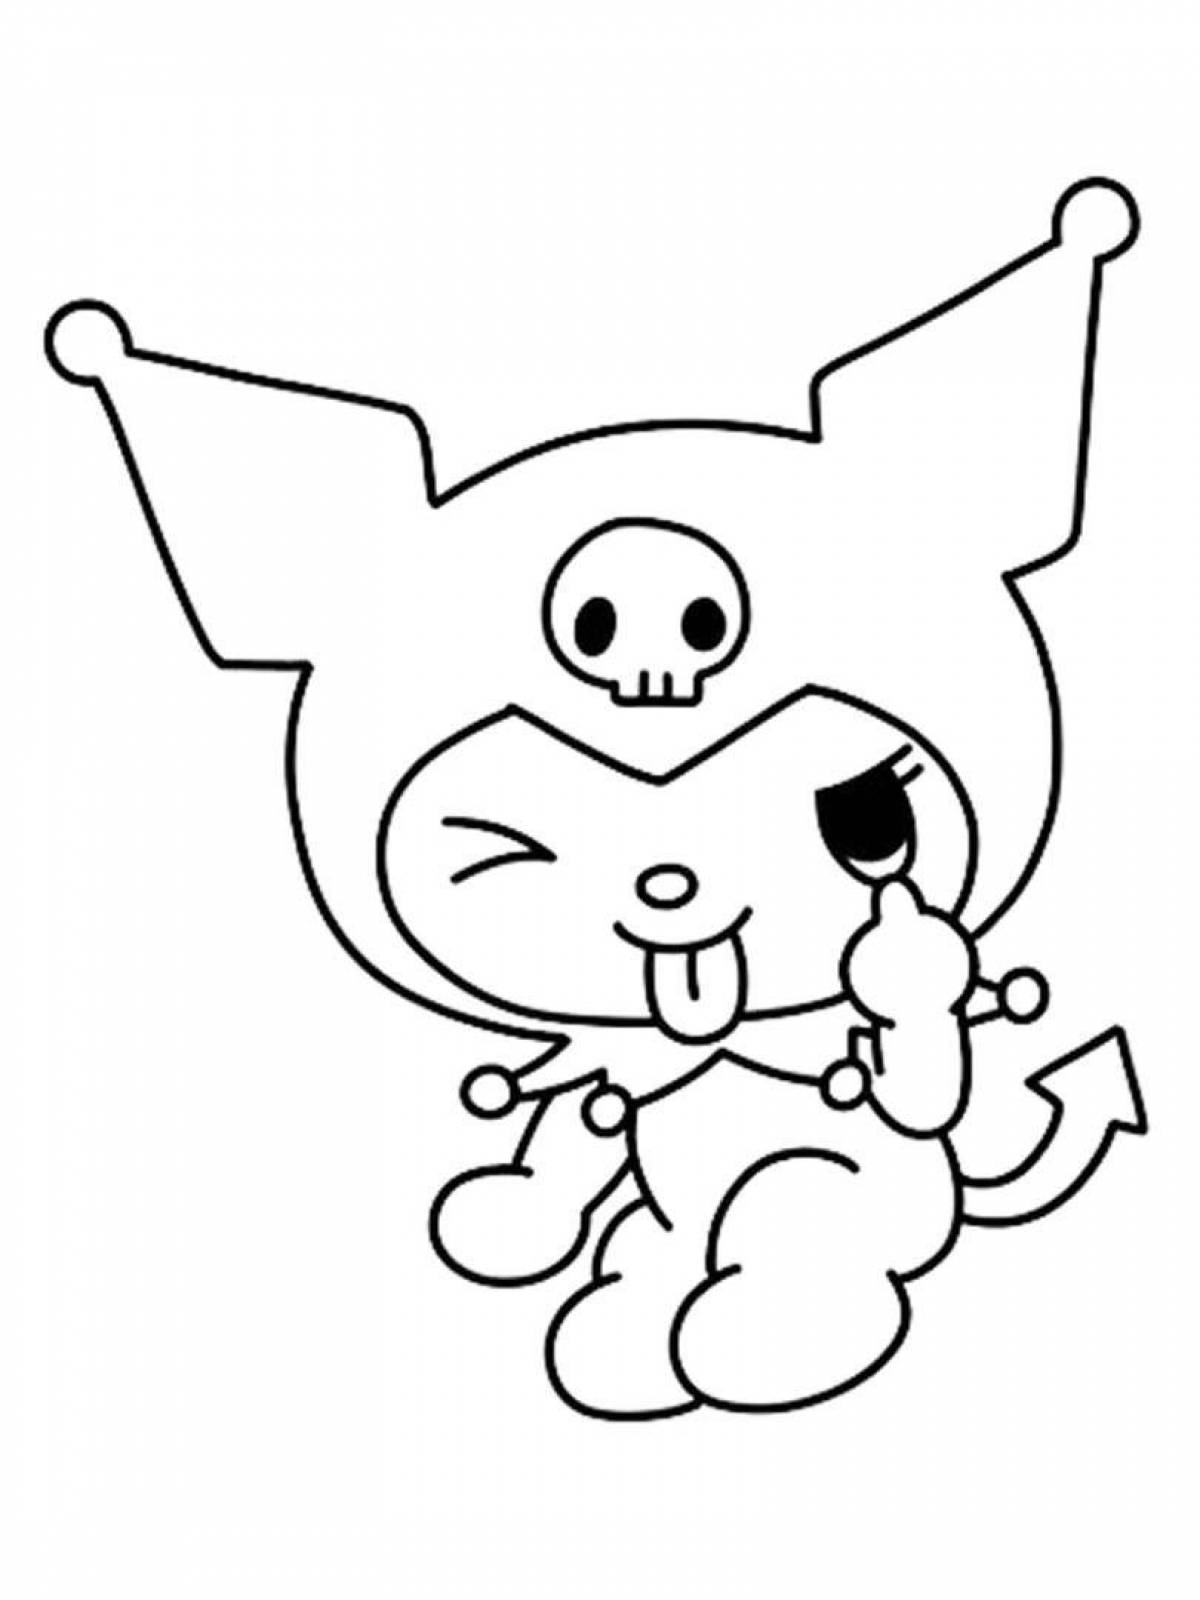 Funny kuromi face coloring page